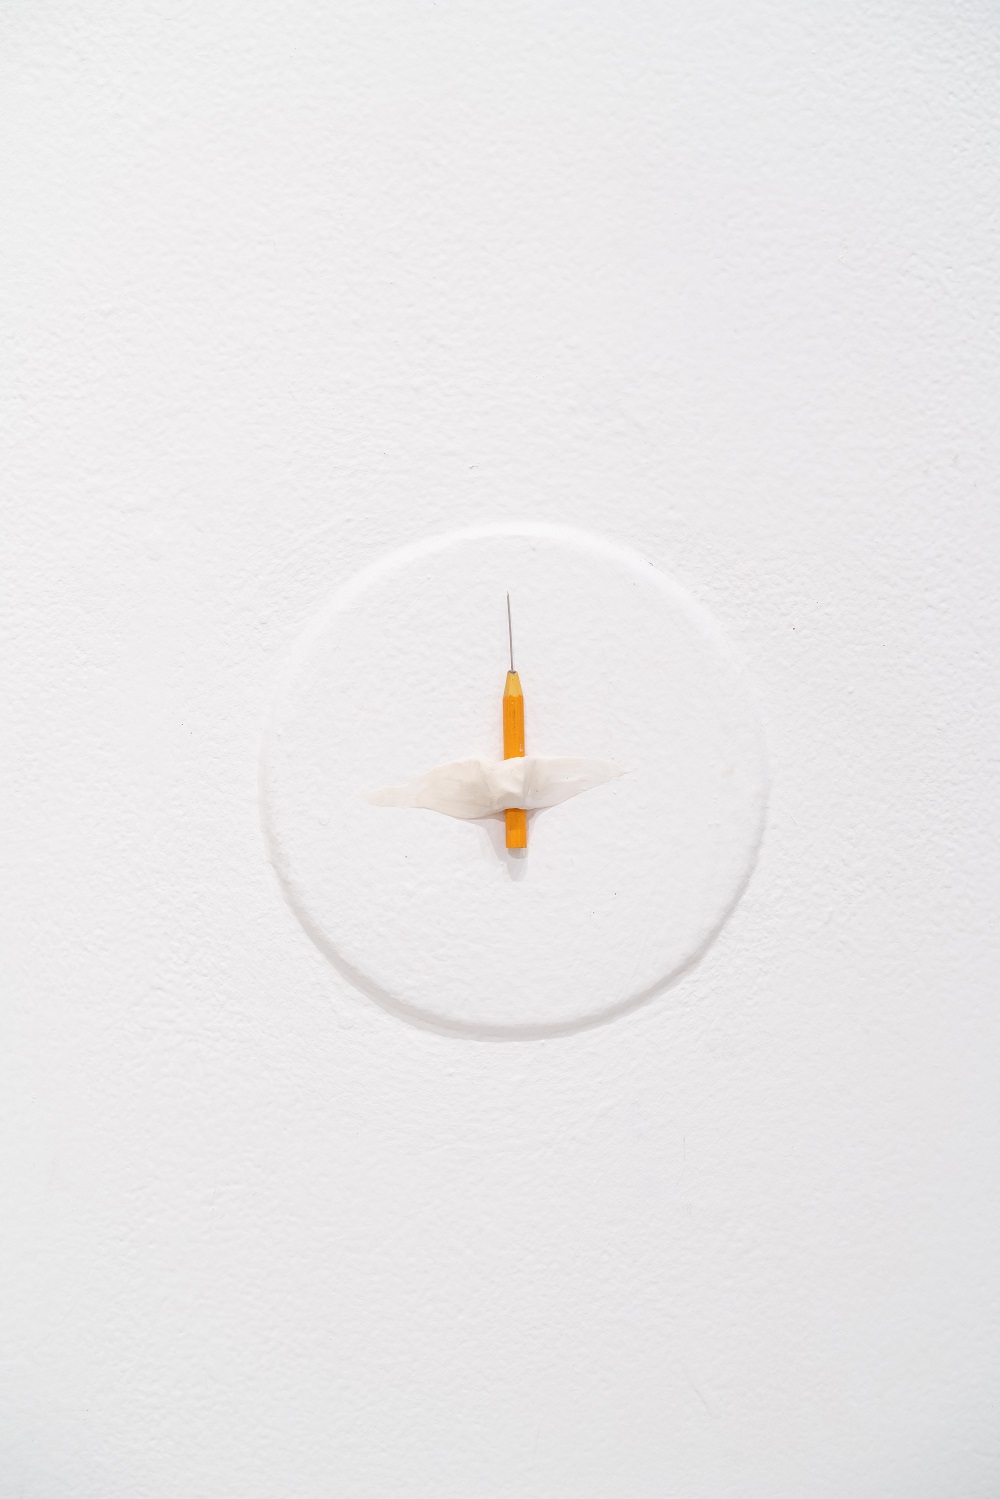 A short pencil with a long lead tip is taped to a white wall